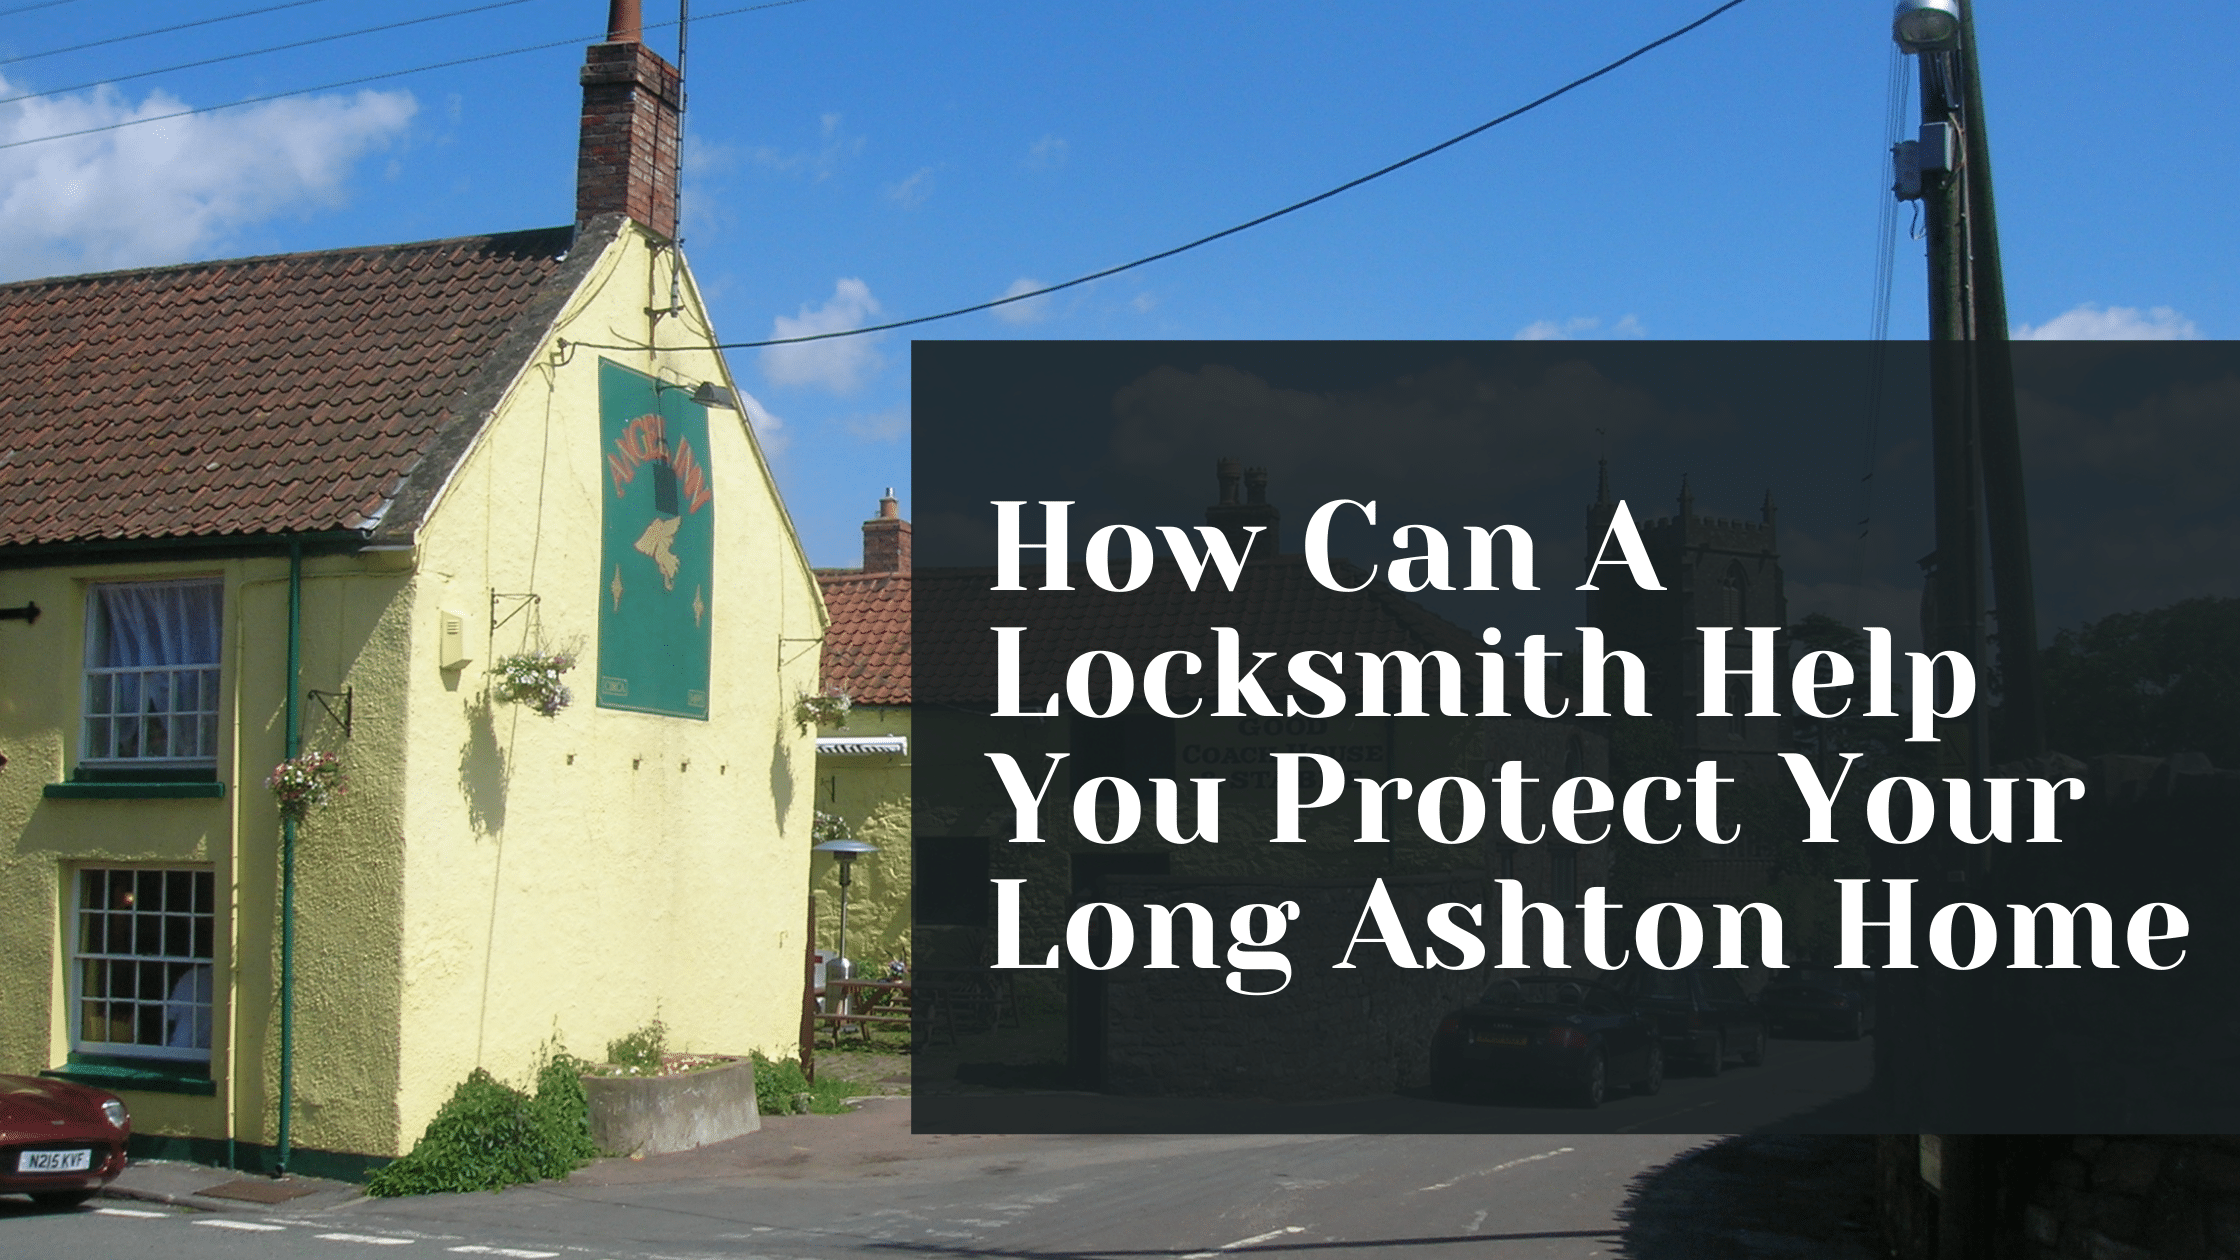 How Can A Locksmith Help You Protect Your Long Ashton Home